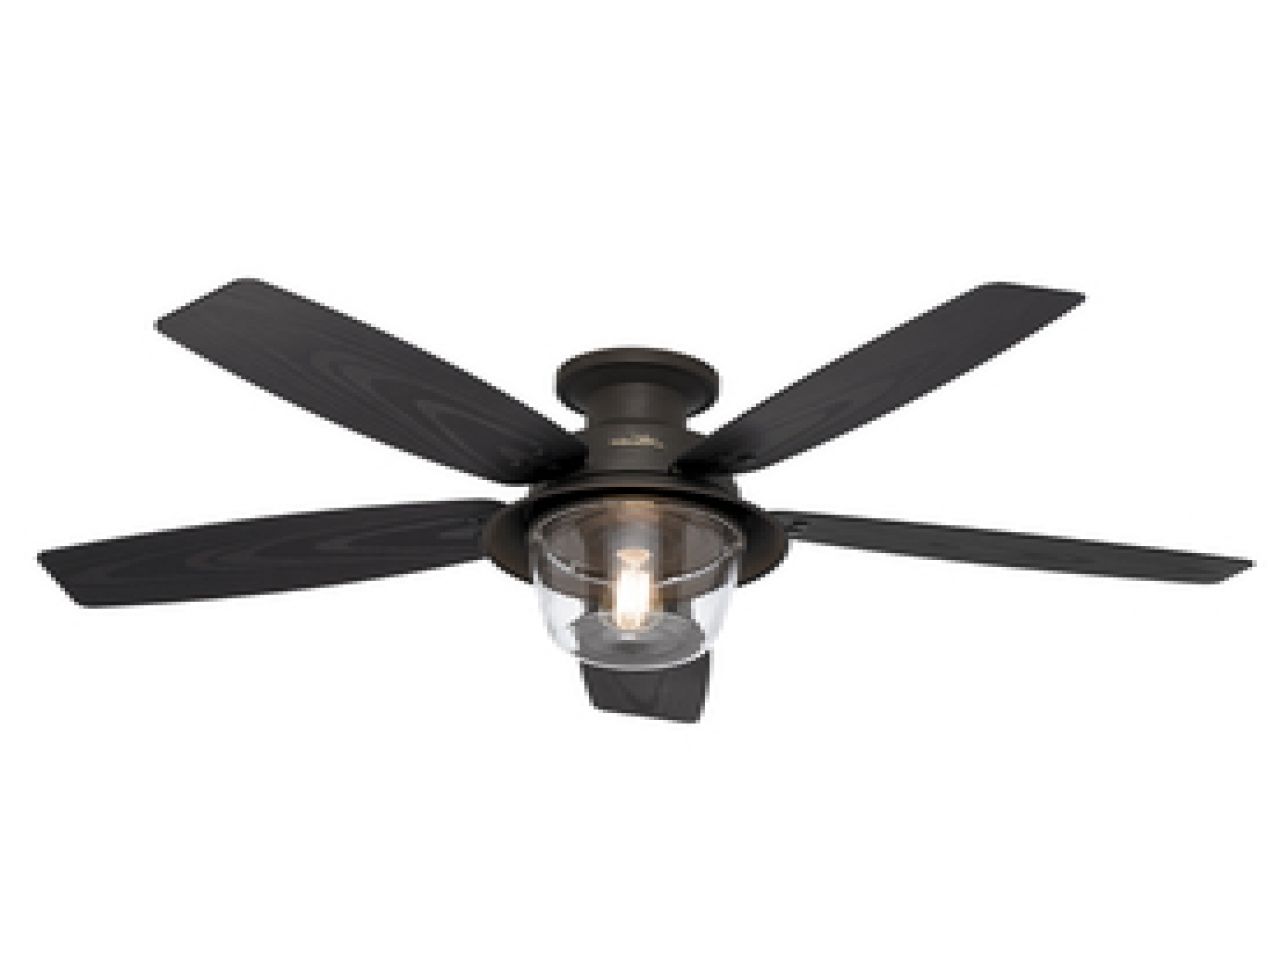 Ceiling: Astounding Small Outdoor Ceiling Fan Hunter Outdoor Ceiling Regarding Current Hunter Outdoor Ceiling Fans With White Lights (View 15 of 20)